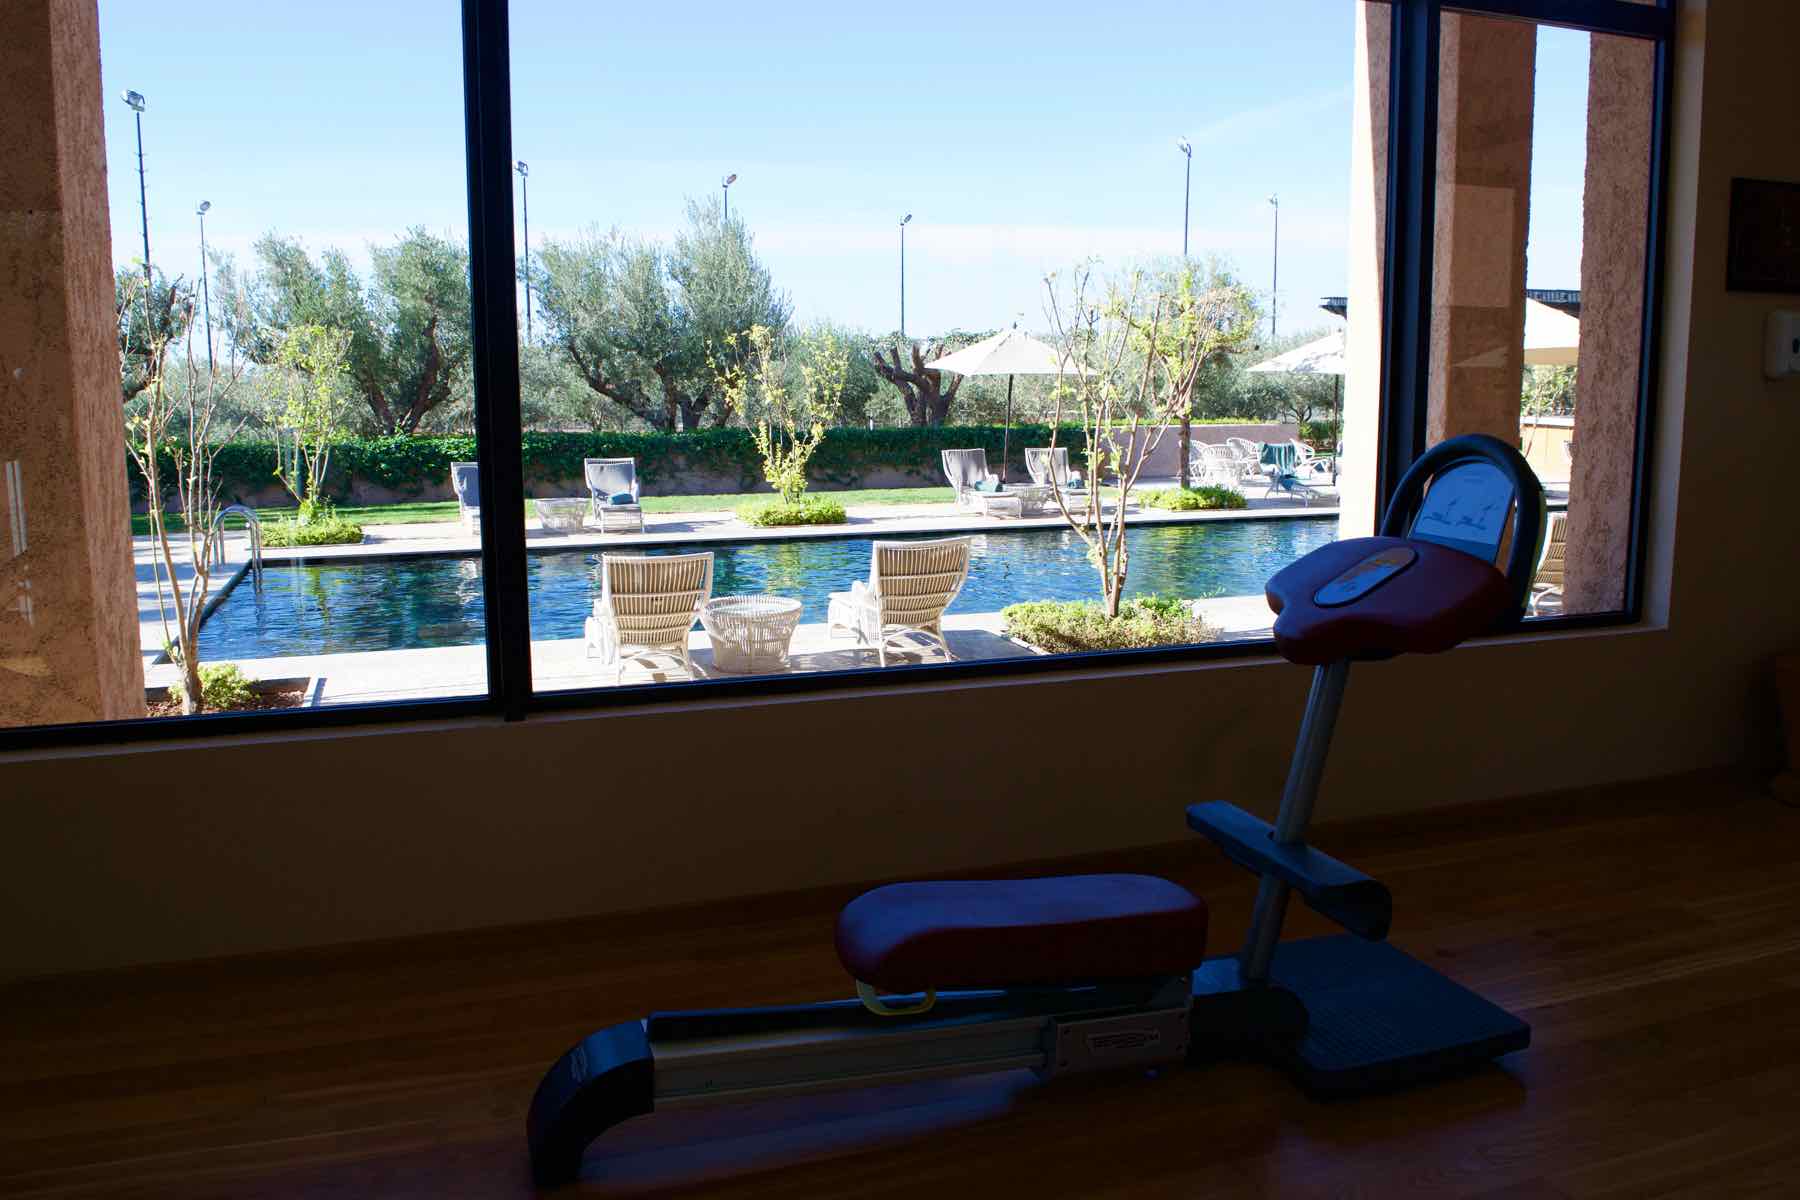 Gym at the Royal Palm Marrakech